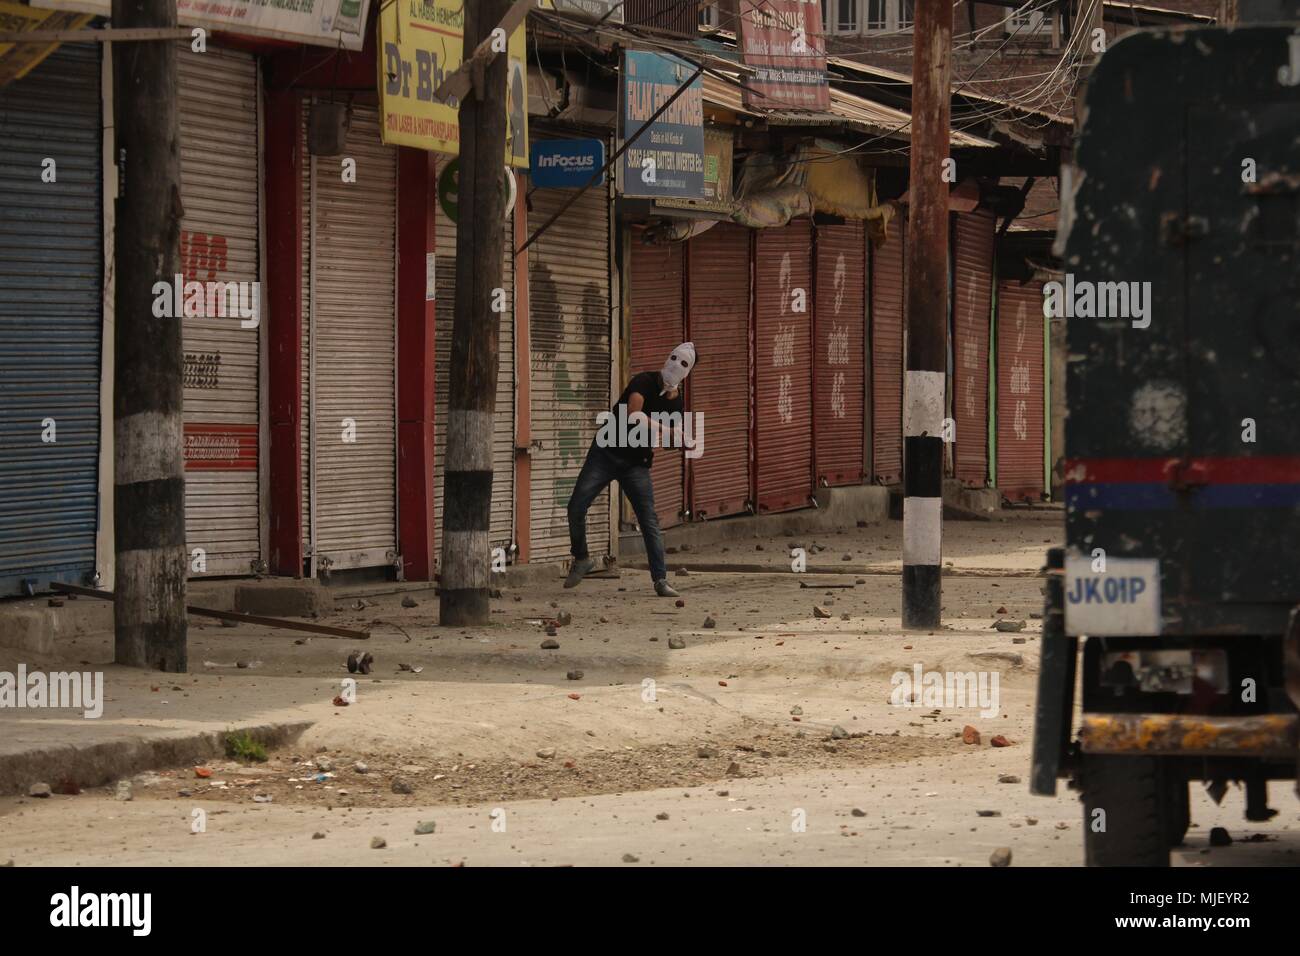 May 5, 2018 - Srinagar, Jammu and Kashmir, India - A protester throw stones during anti-India clashes in Srinagar the summer of Indian controlled Kashmir on May 05, 2018. Four people including a protester and three rebels were killed during a gun-battle between rebels and Indian forces in Chattabal area of Srinagar. Massive clashes erupt across Srinagar after the news about the trapping of rebels and killing of protester spread across the city. Police fired teargas canisters, pellets, stun grenades and rubber coated bullets to disperse the angry crowd. (Credit Image: © Faisal Khan via ZUMA Wir Stock Photo